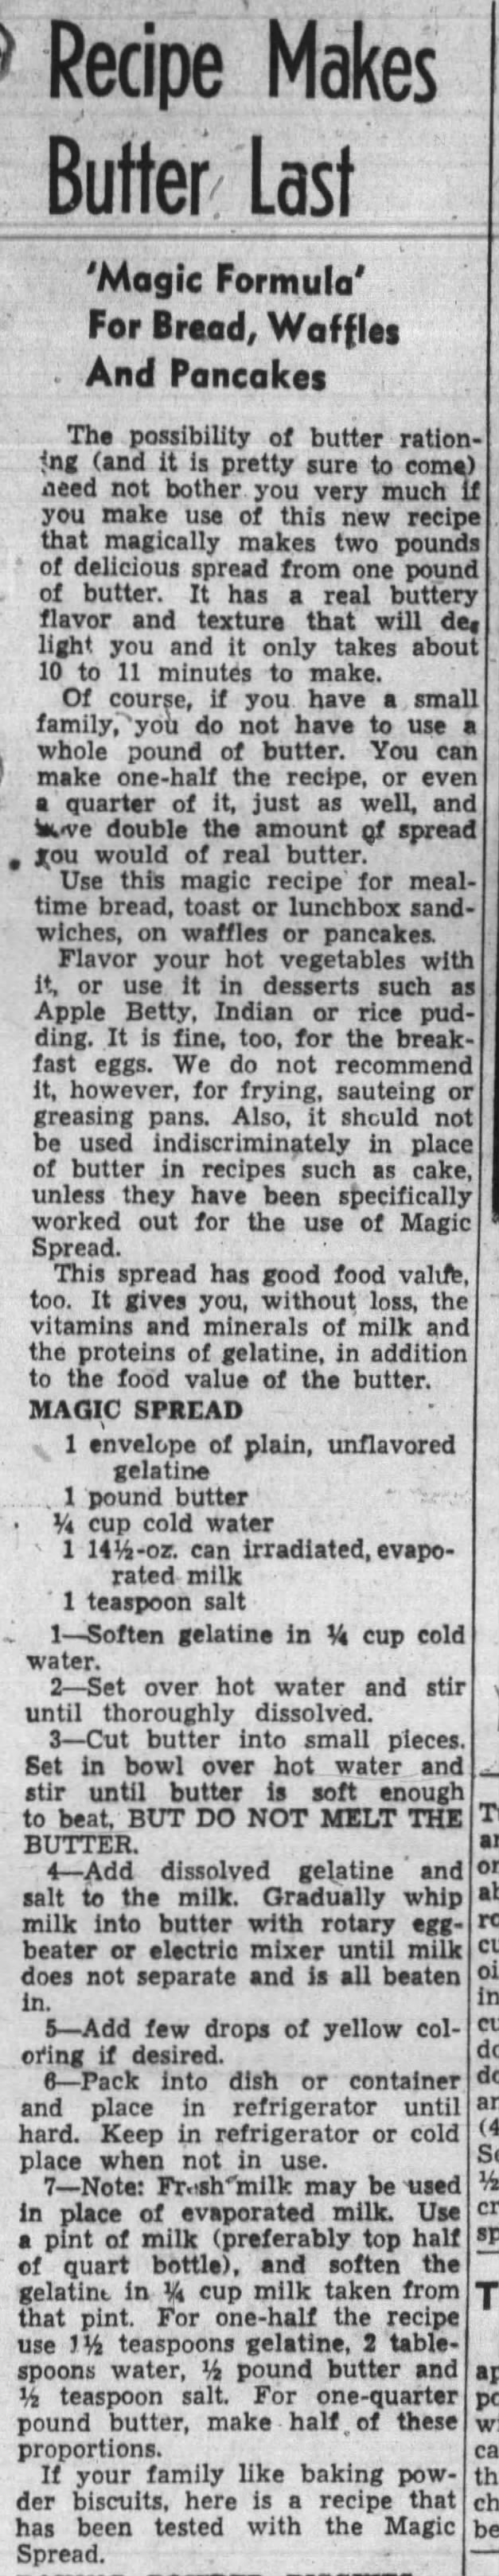 Recipe for "magic spread" that makes butter go father (1943)